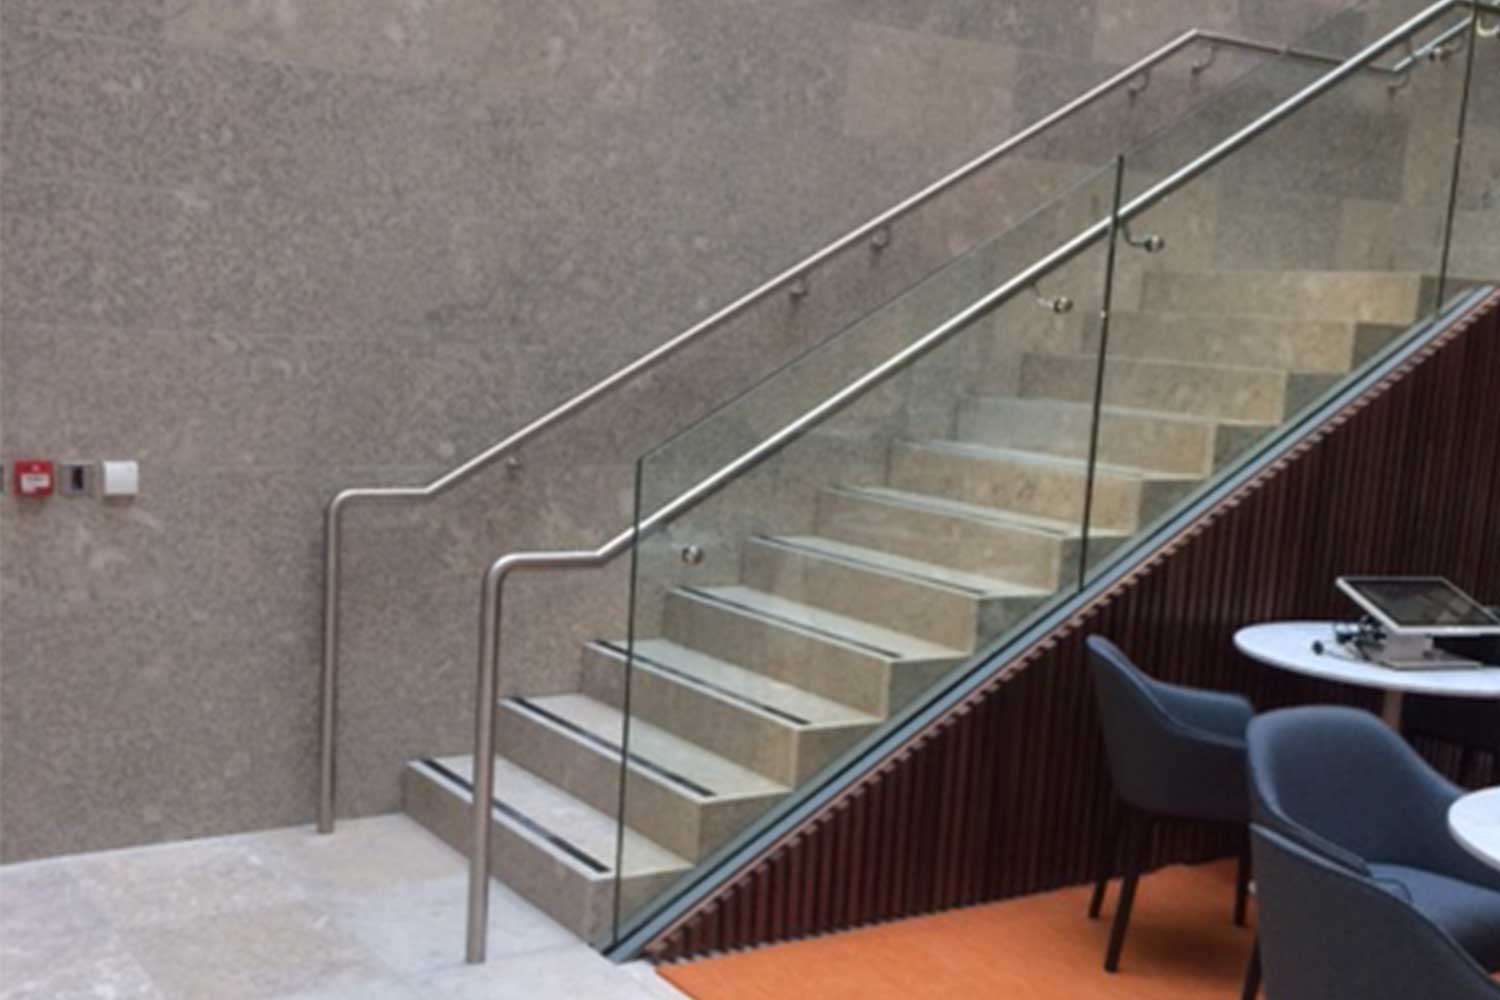 OMC Technologies - Complete feature staircase as part of Arthur Cox refubishment